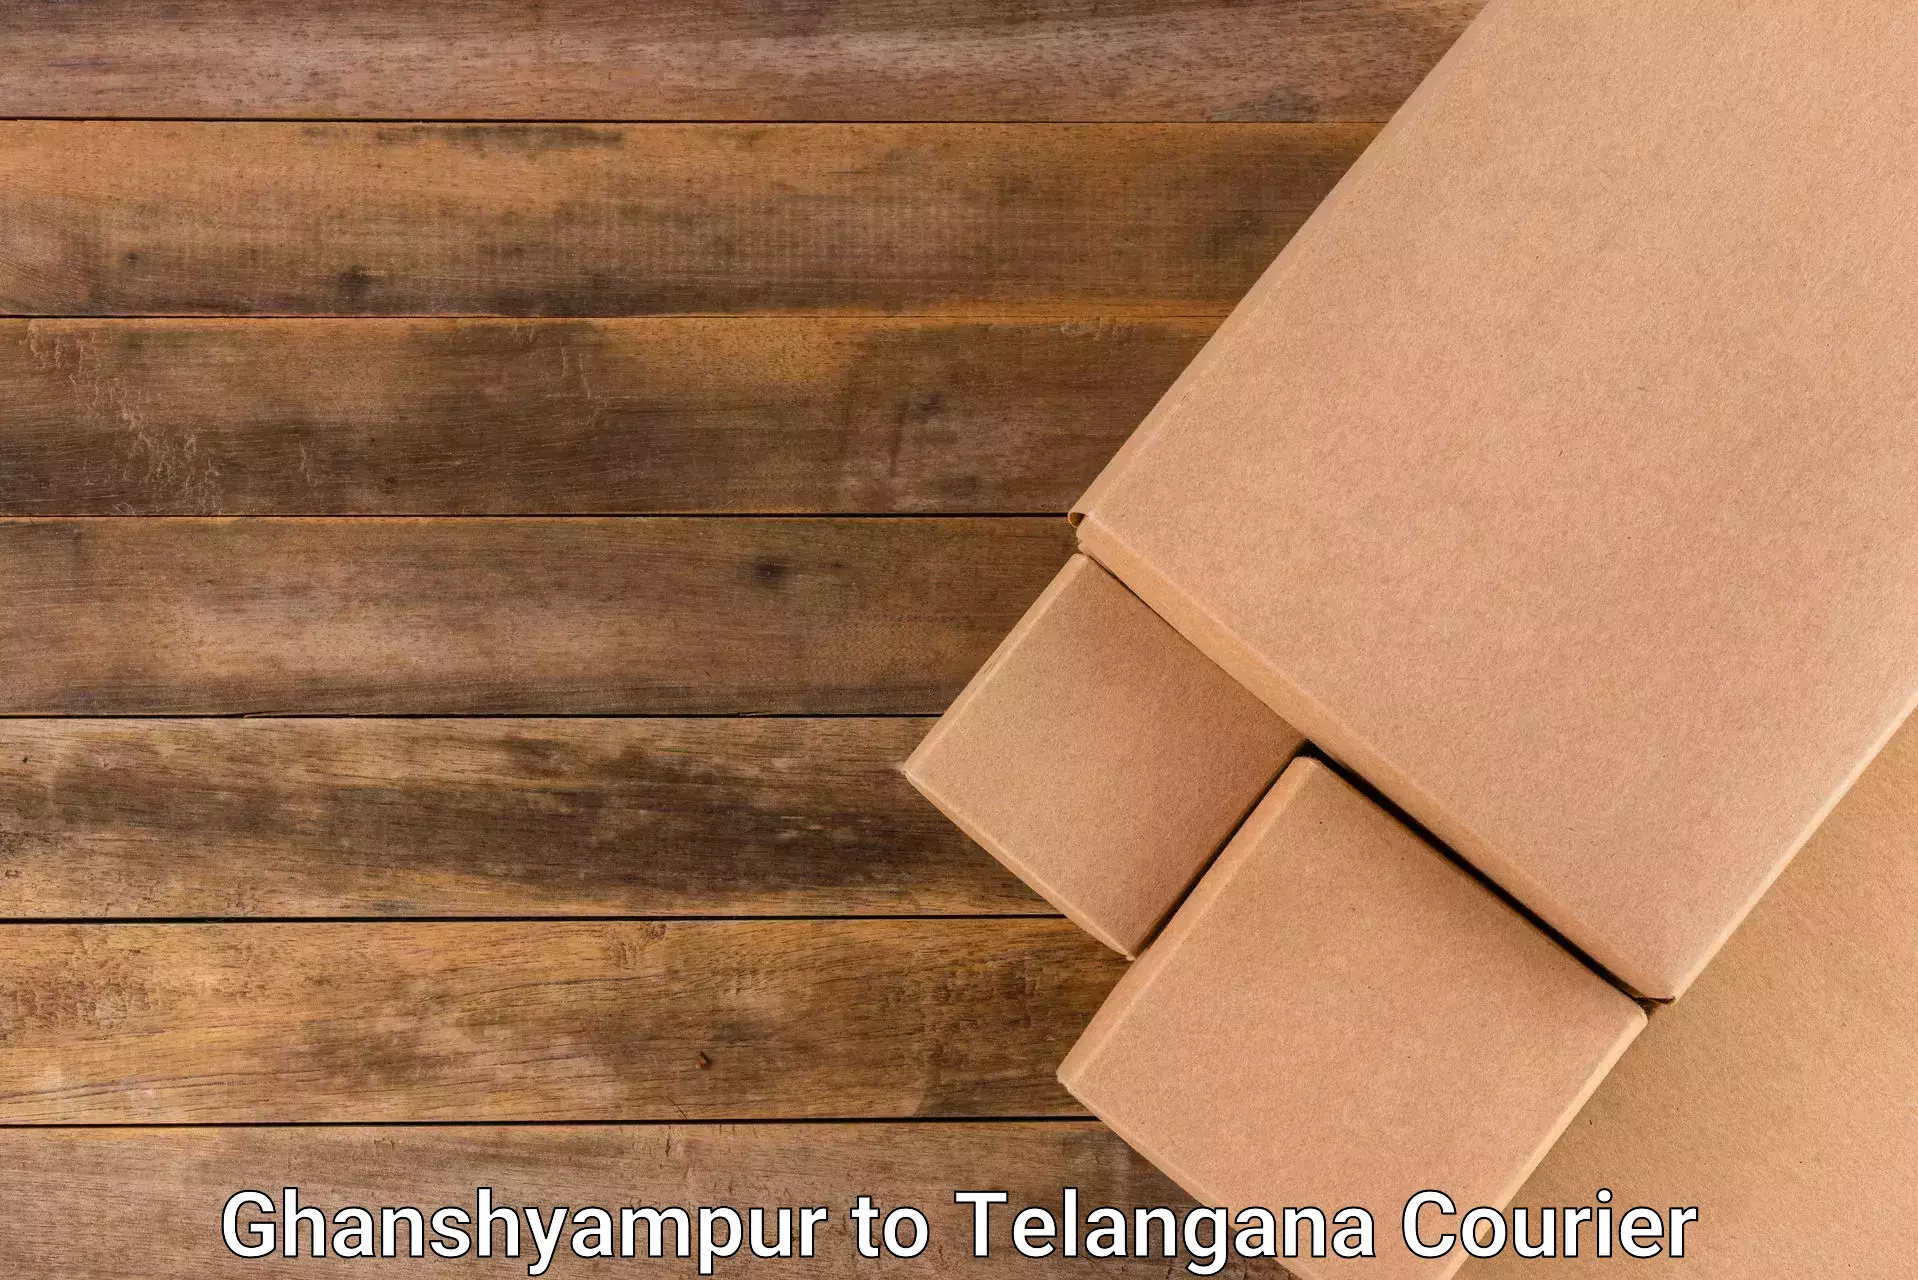 Bulk courier orders Ghanshyampur to Trimulgherry